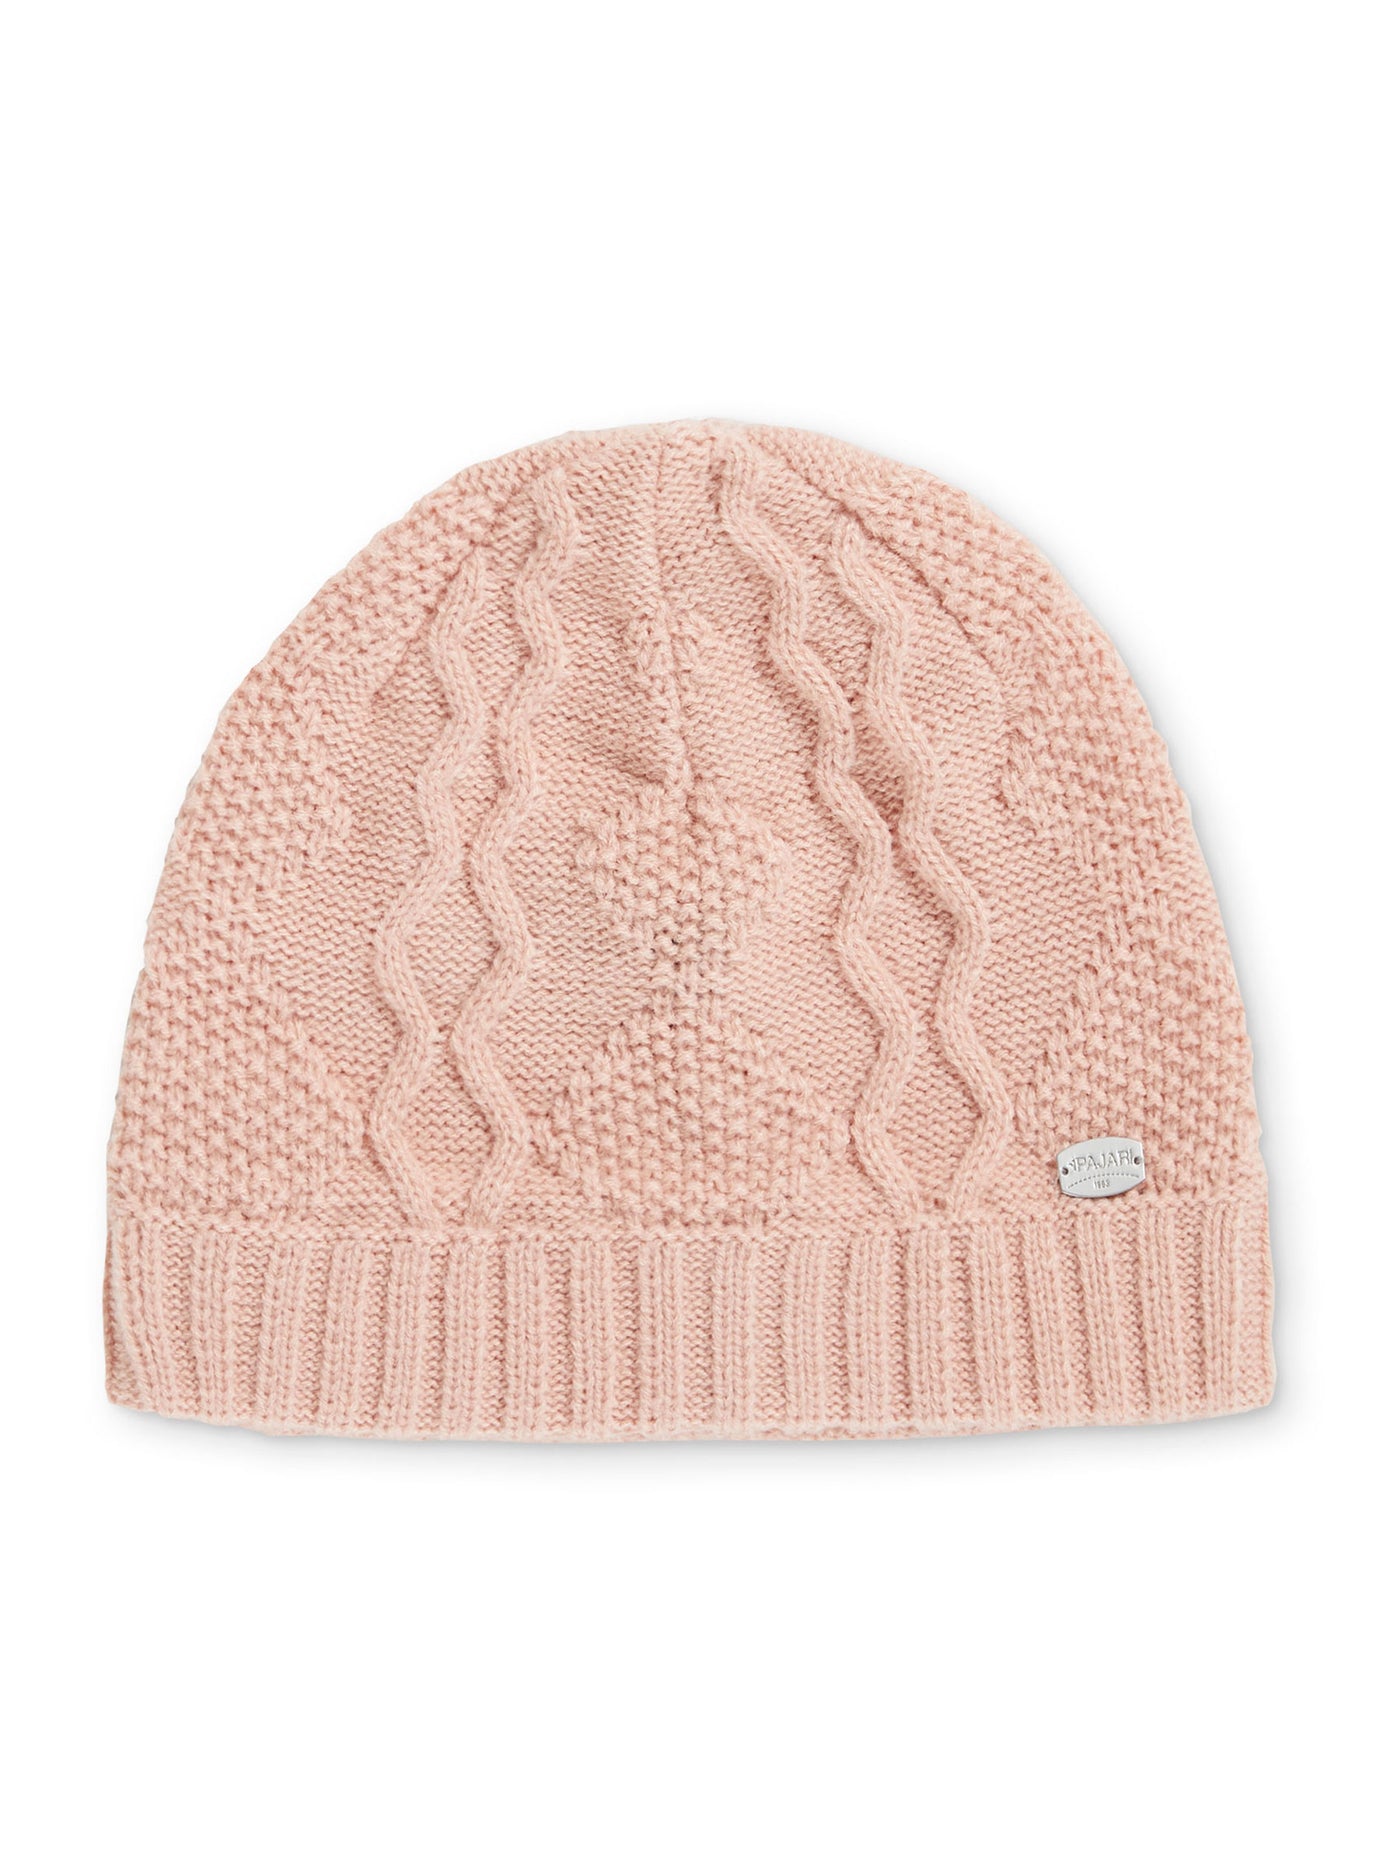 Mary Light Gauge Cable Knit Hat